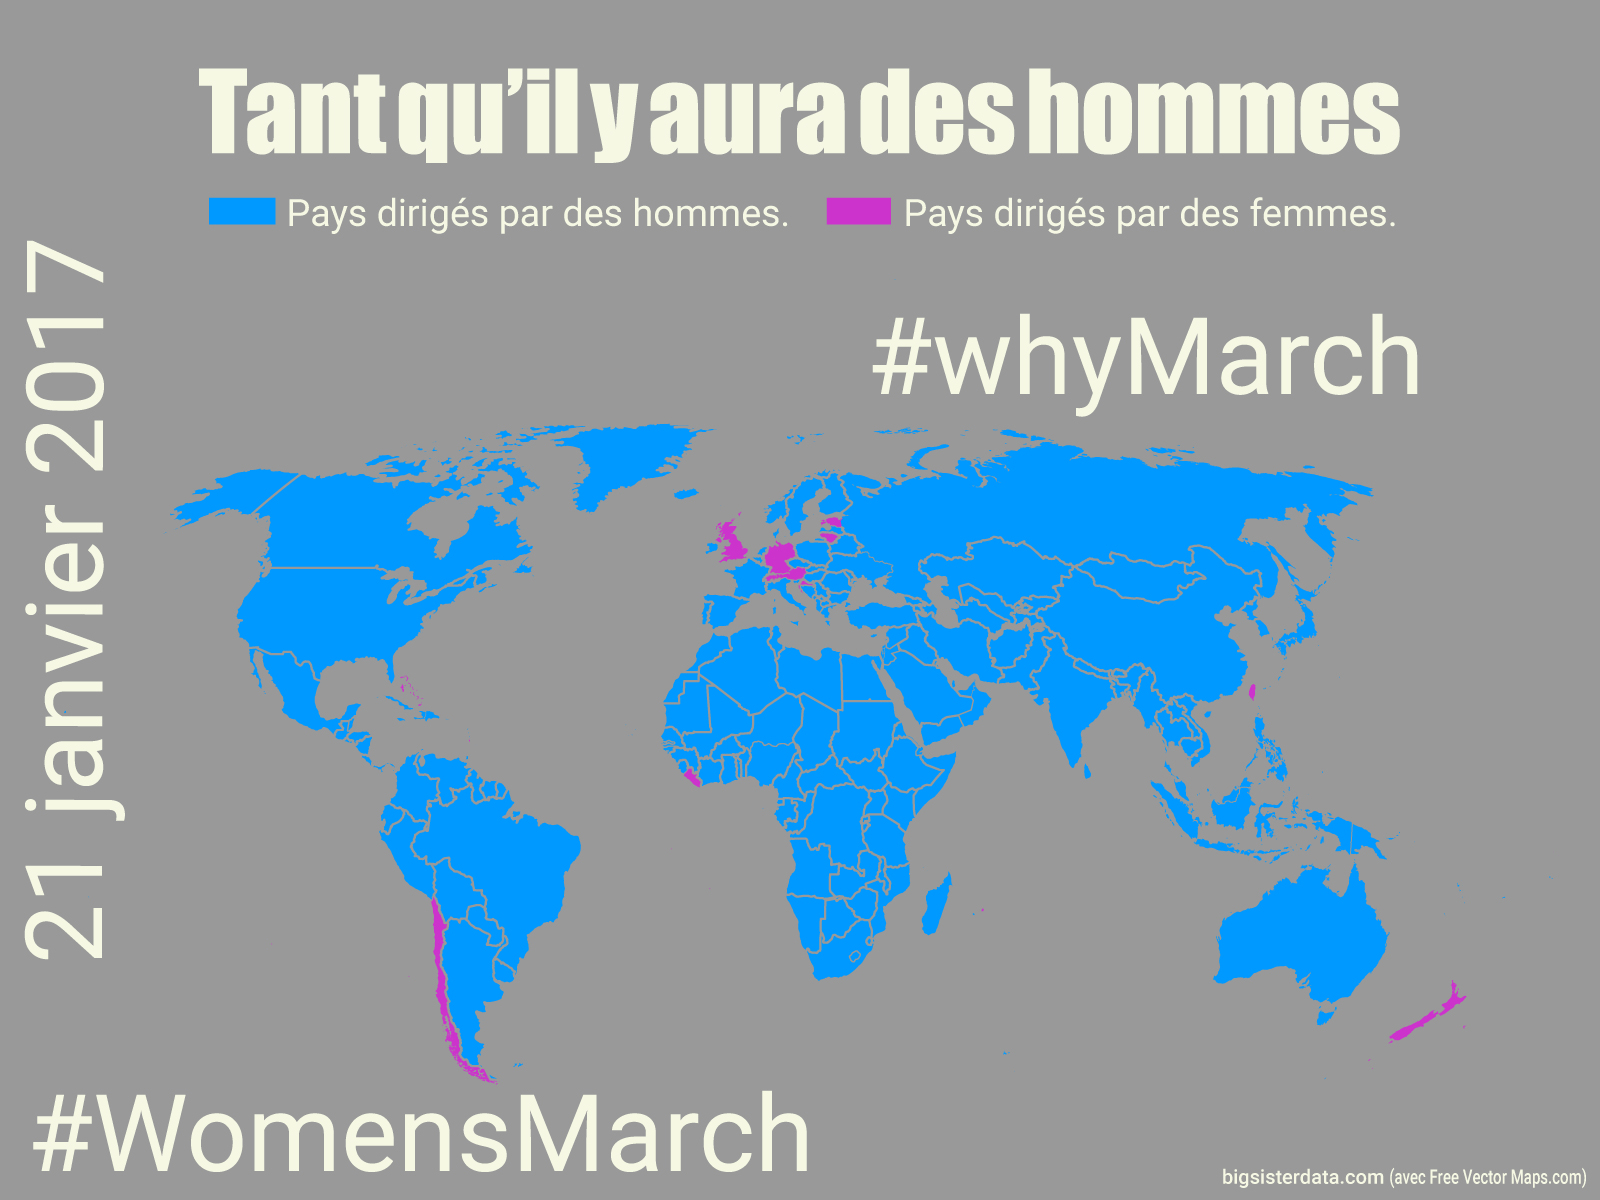 whyMarch